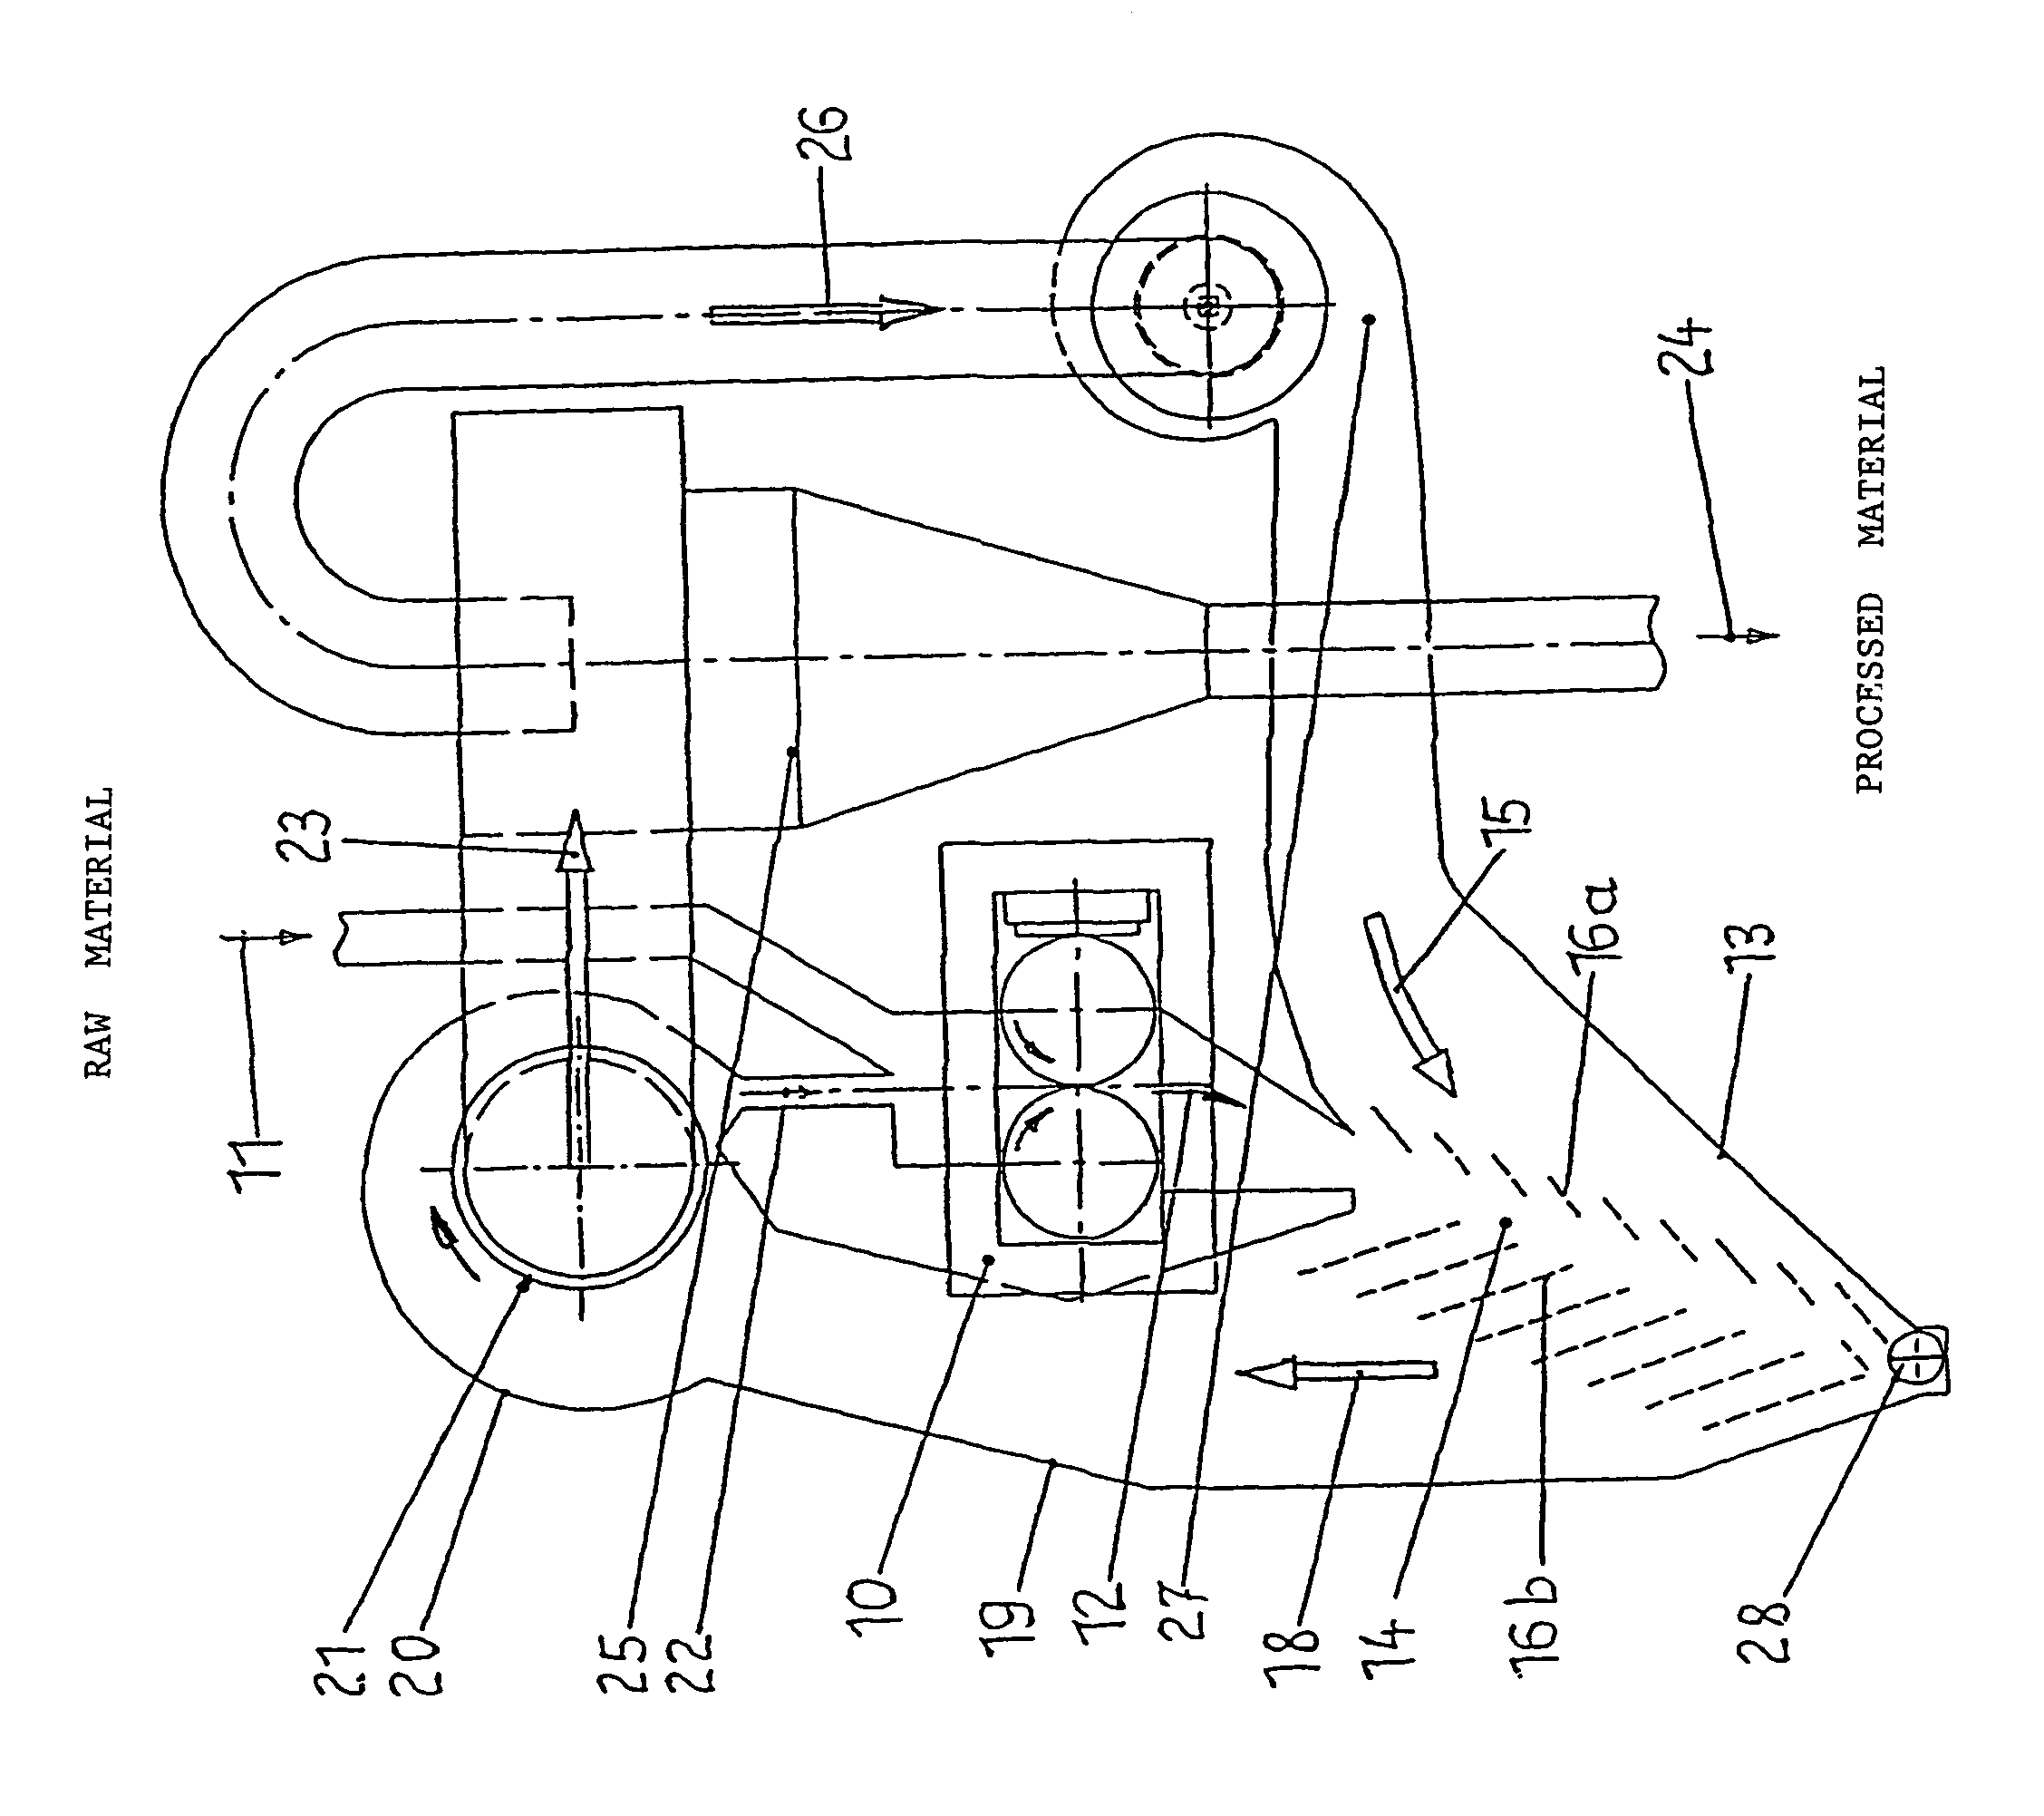 Circulating grinding plant comprising a mill and a sifter